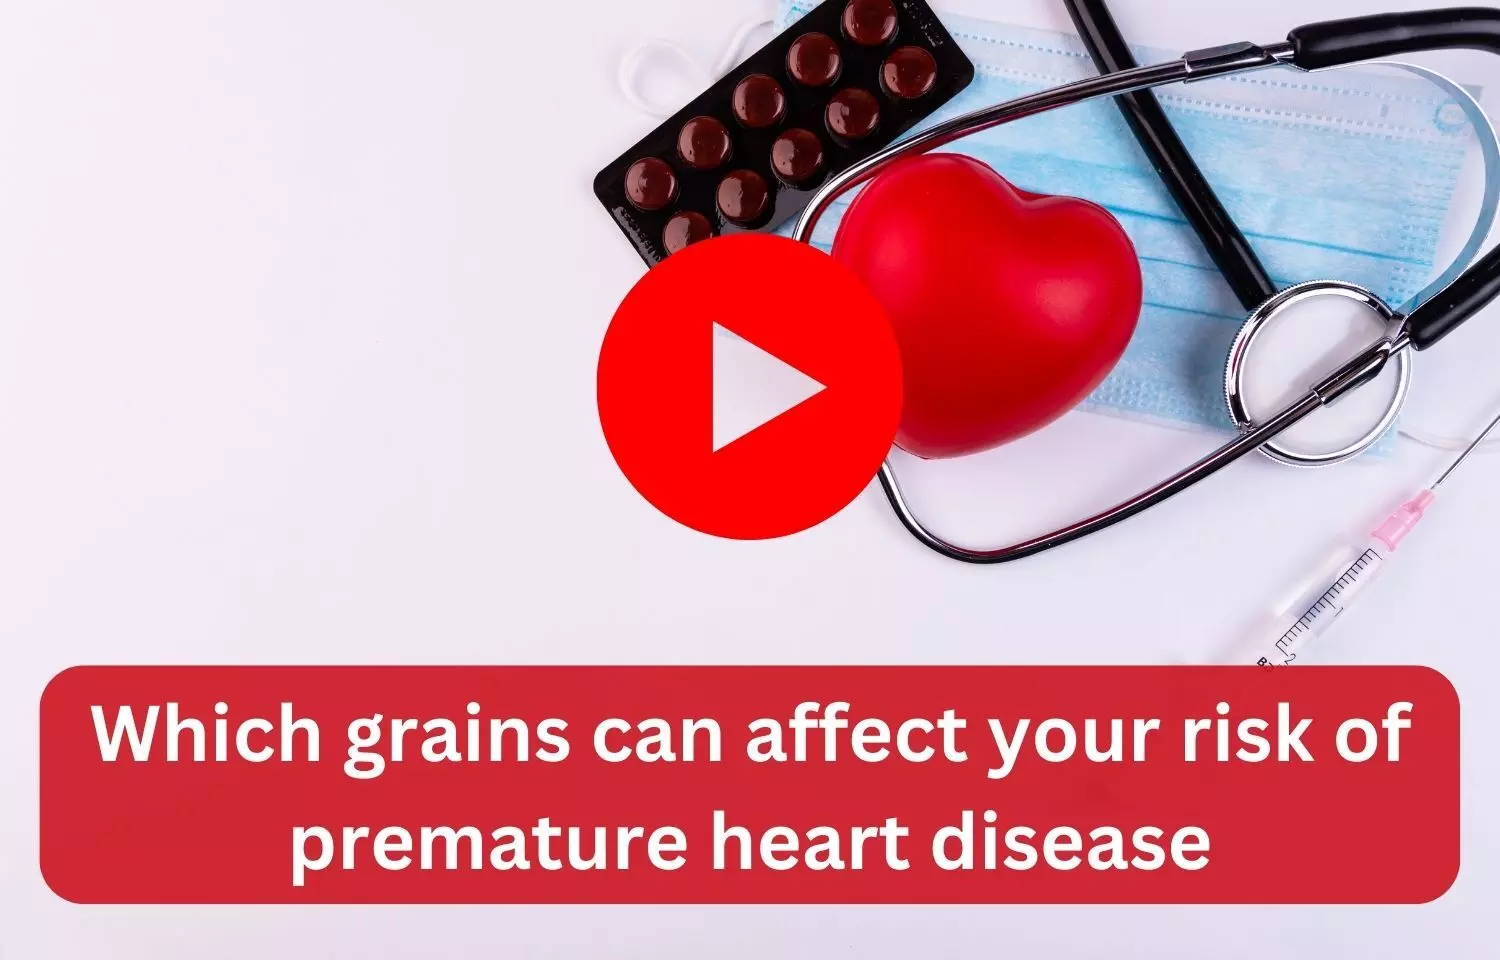 Which grains can affect your risk of premature heart disease